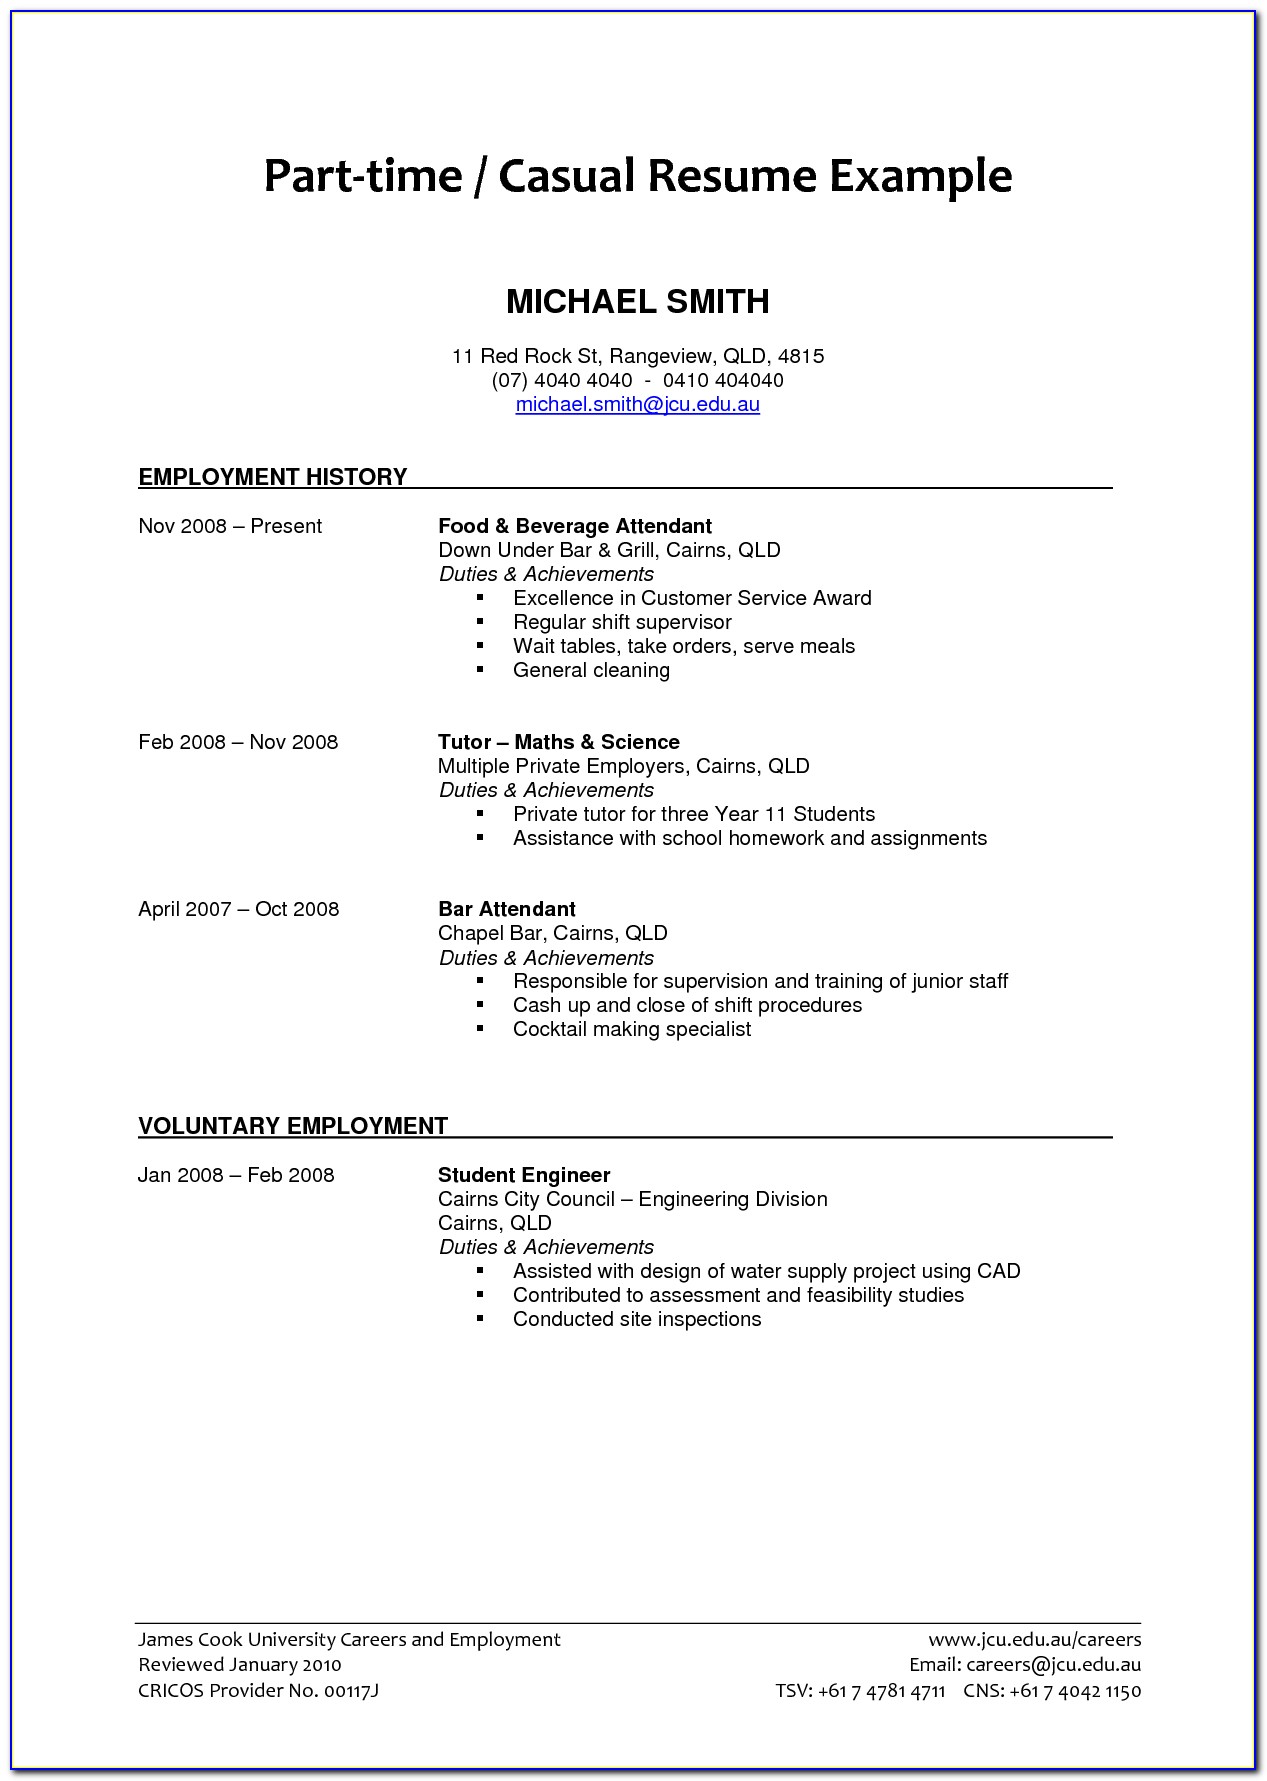 Resume Examples For Part Time Jobs